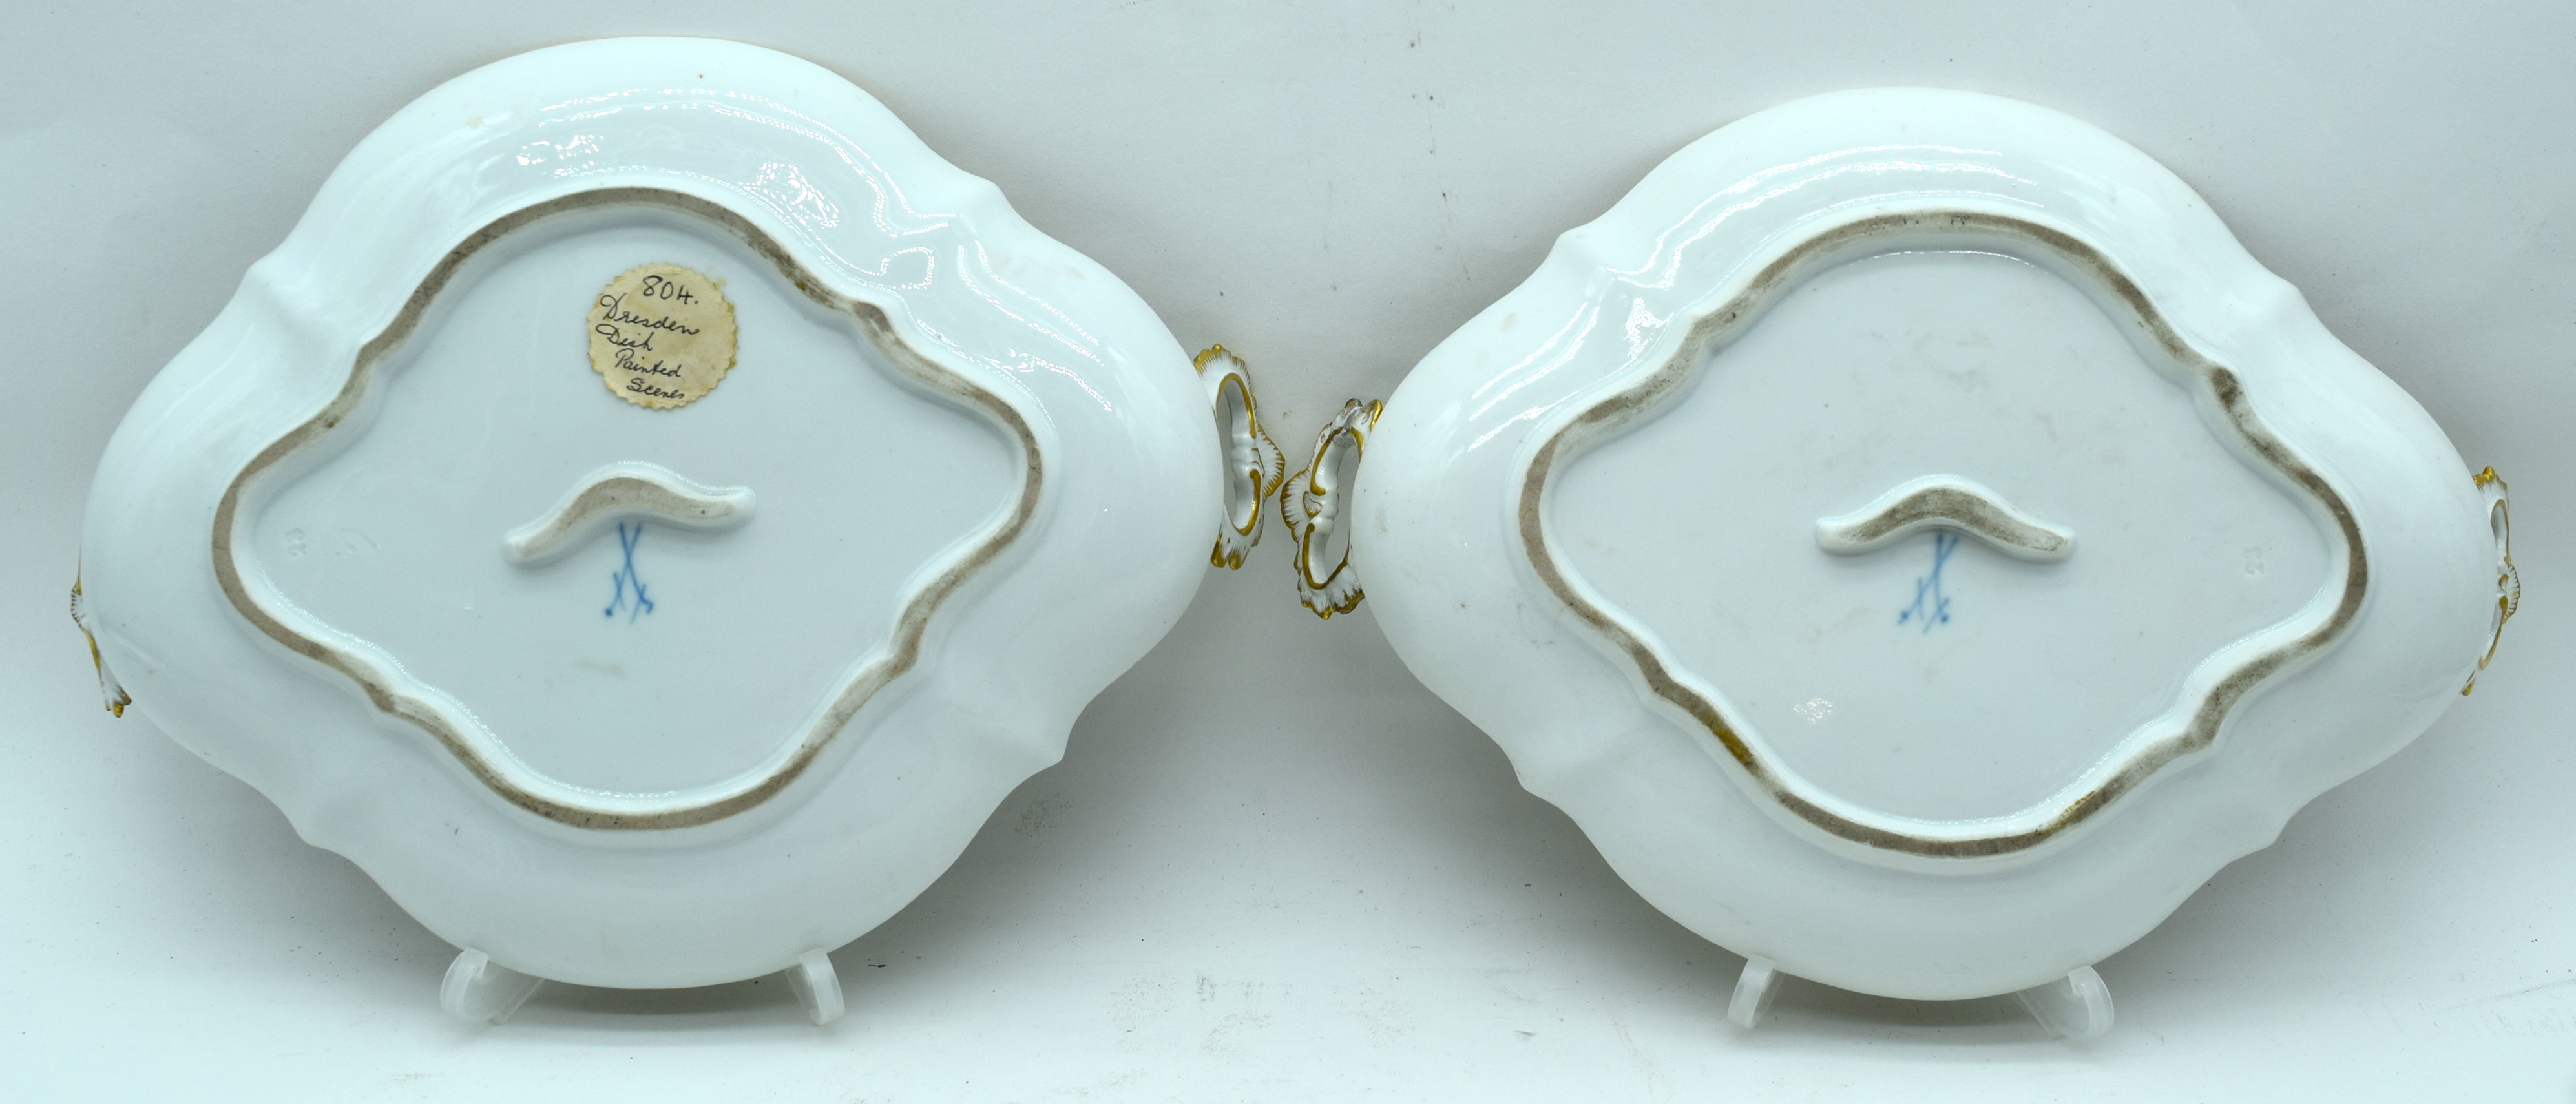 A FINE PAIR OF 18TH/19TH CENTURY MEISSEN TWIN HANDLED PORCELAIN DISHES painted with coastal views. 2 - Image 4 of 19